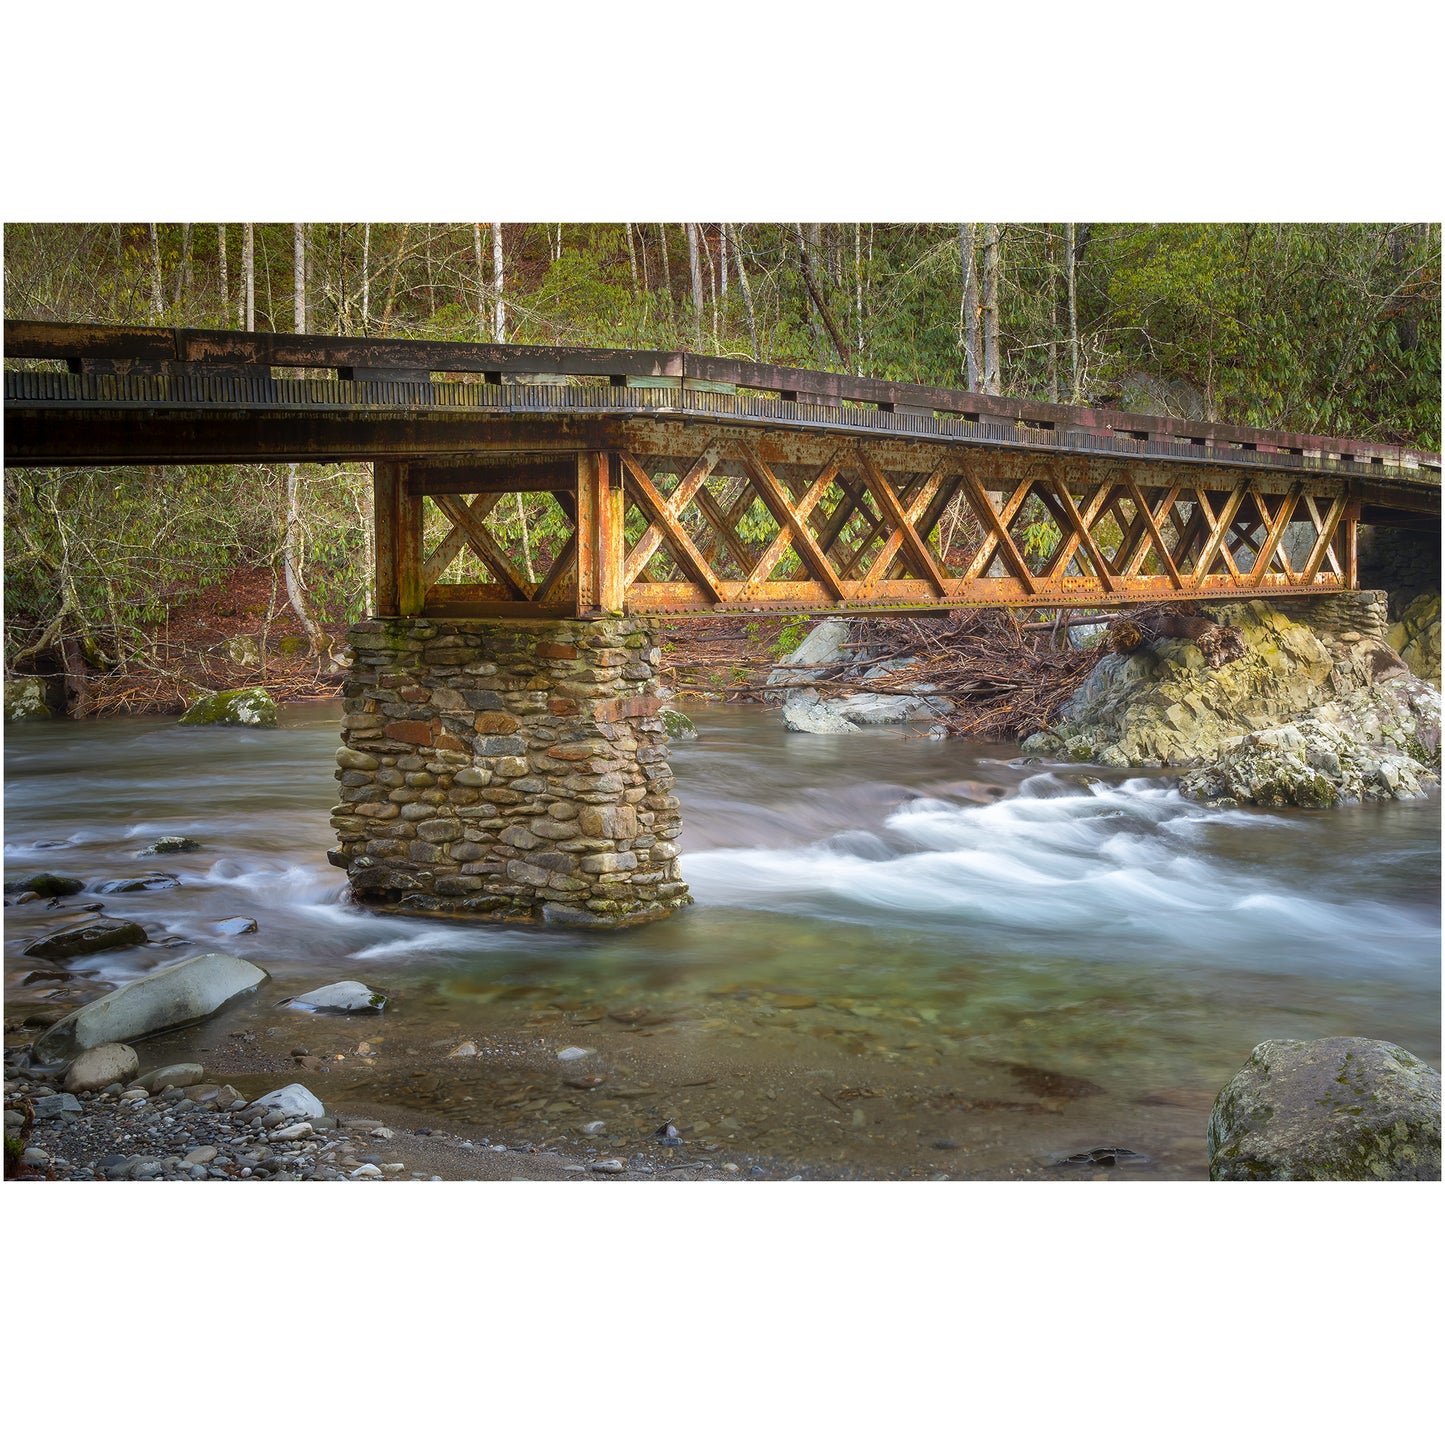 wall art print of a bridge in the great smoky mountains national park